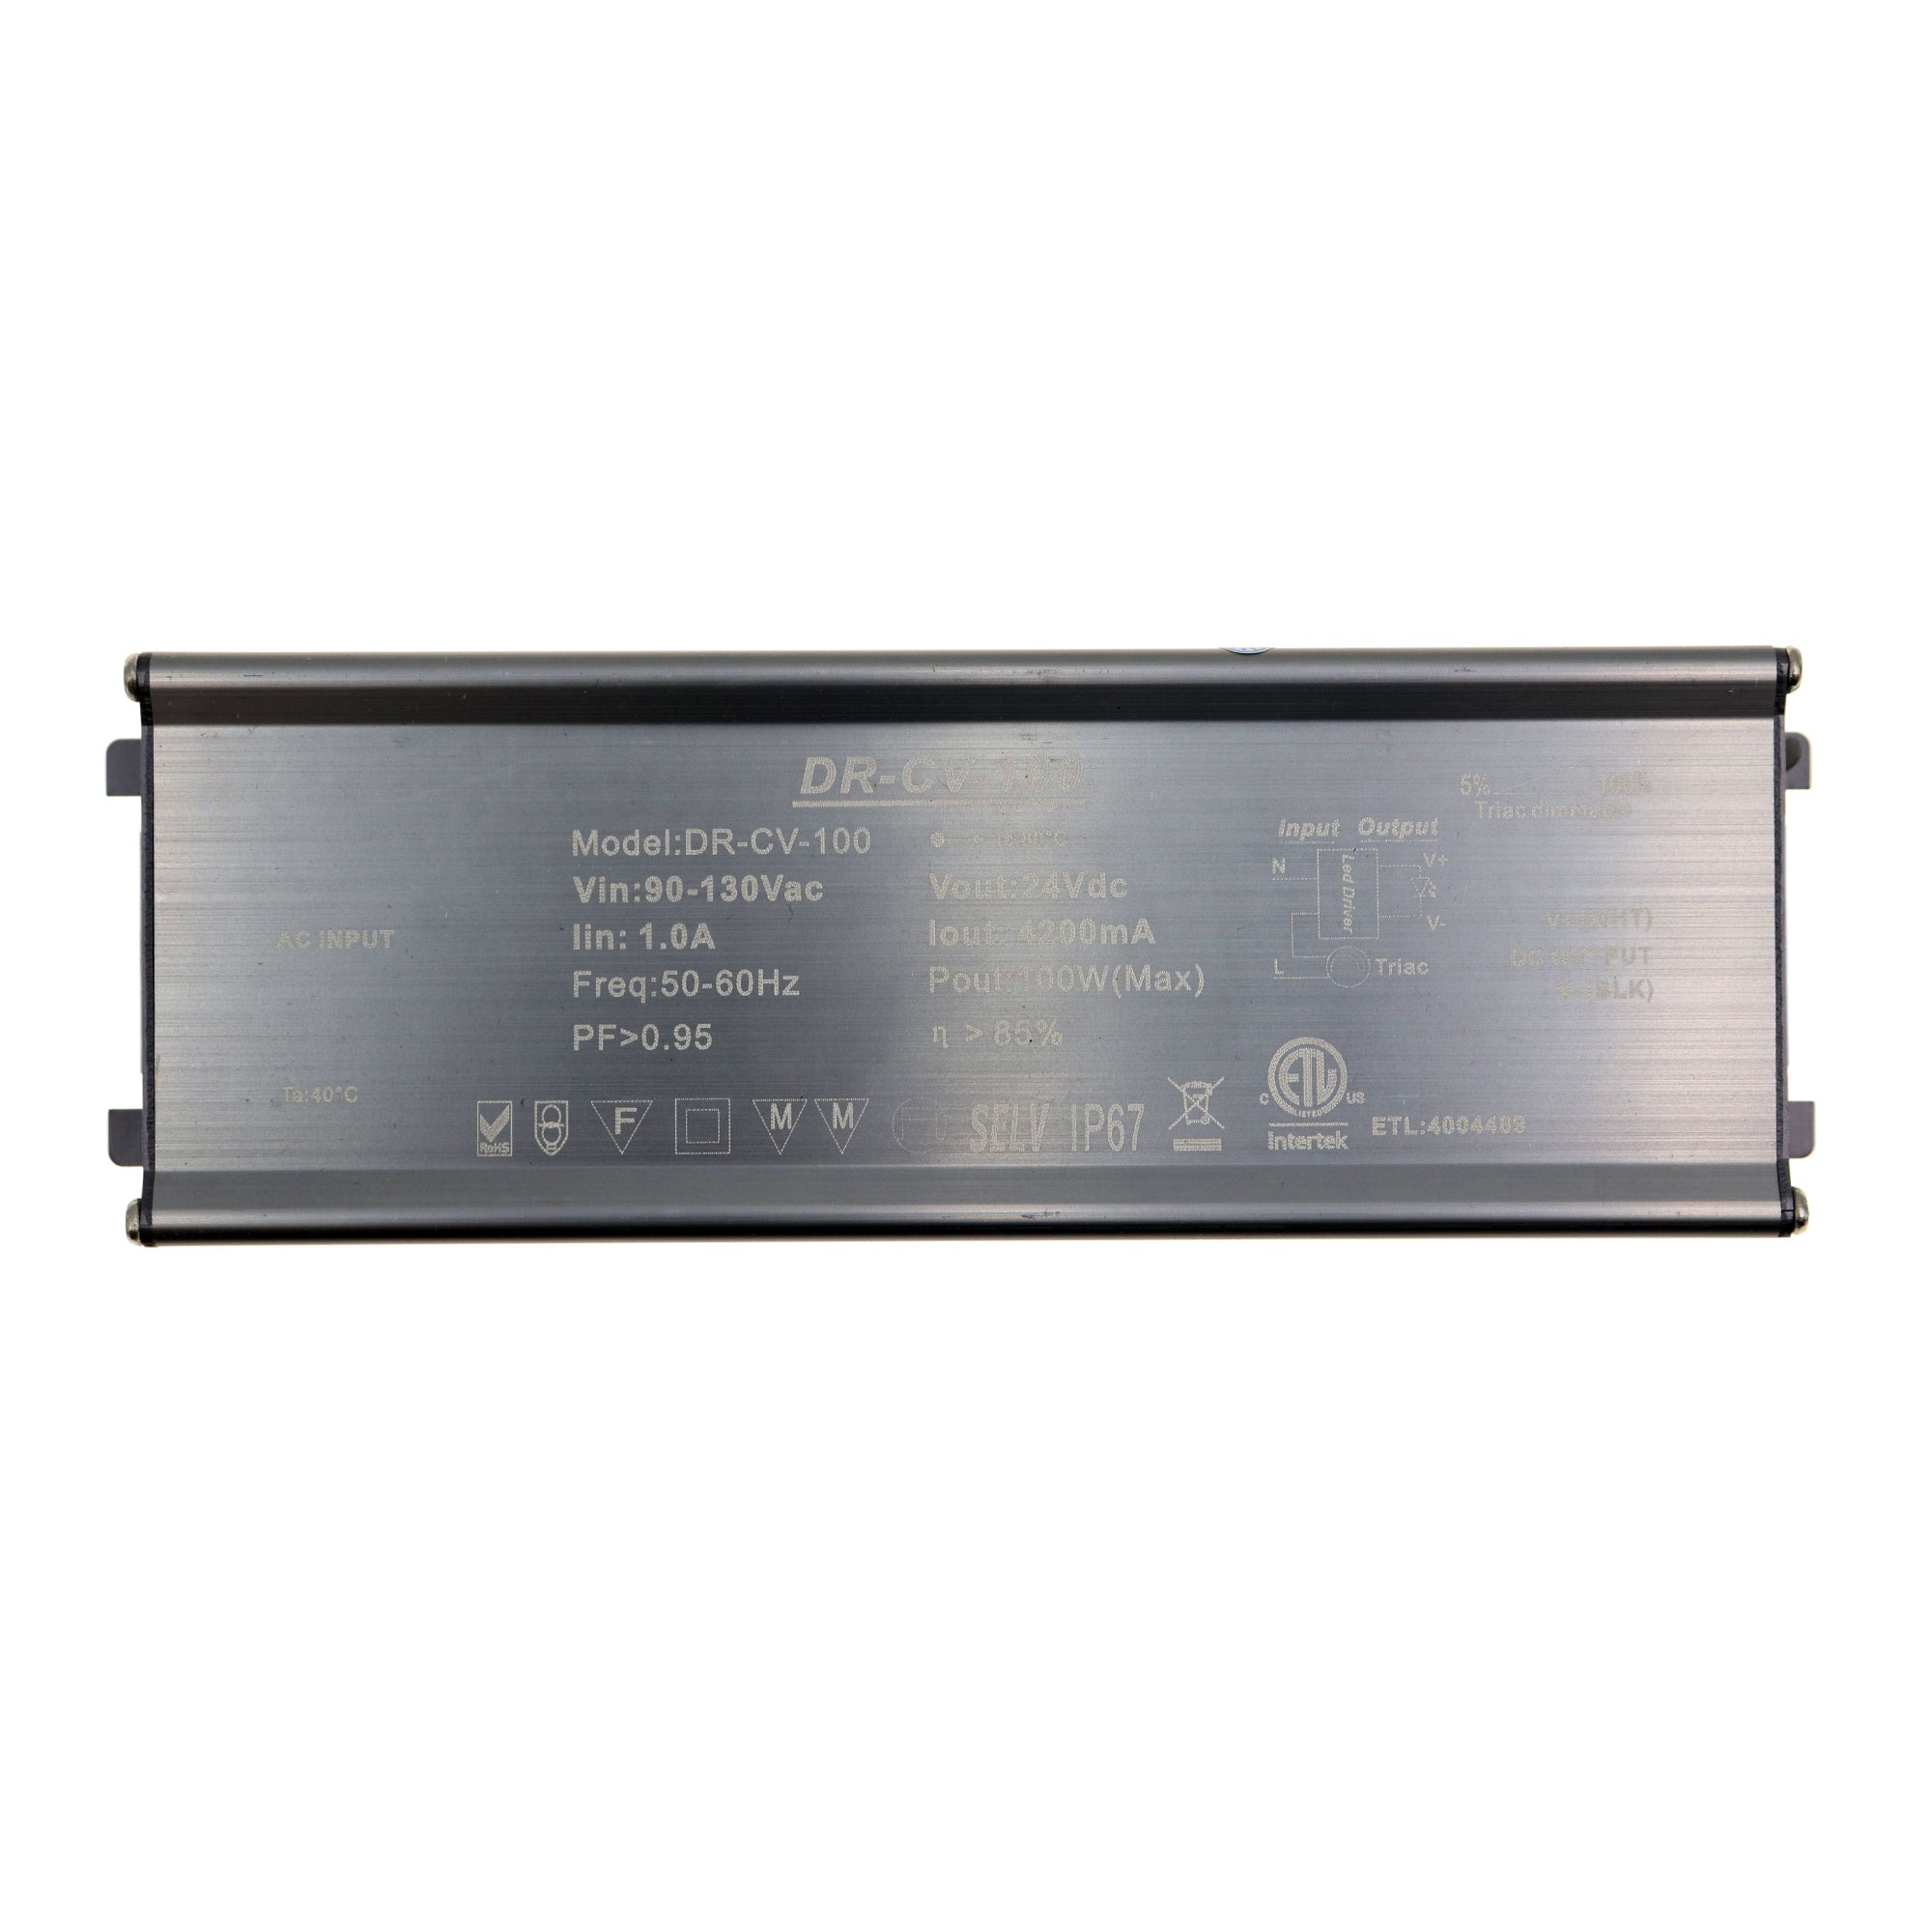 Generic, DR-CV-100 TRIAC DIMMABLE LED DRIVER, 24VDC, 4200MA, 100W, 120V:IN, IP67